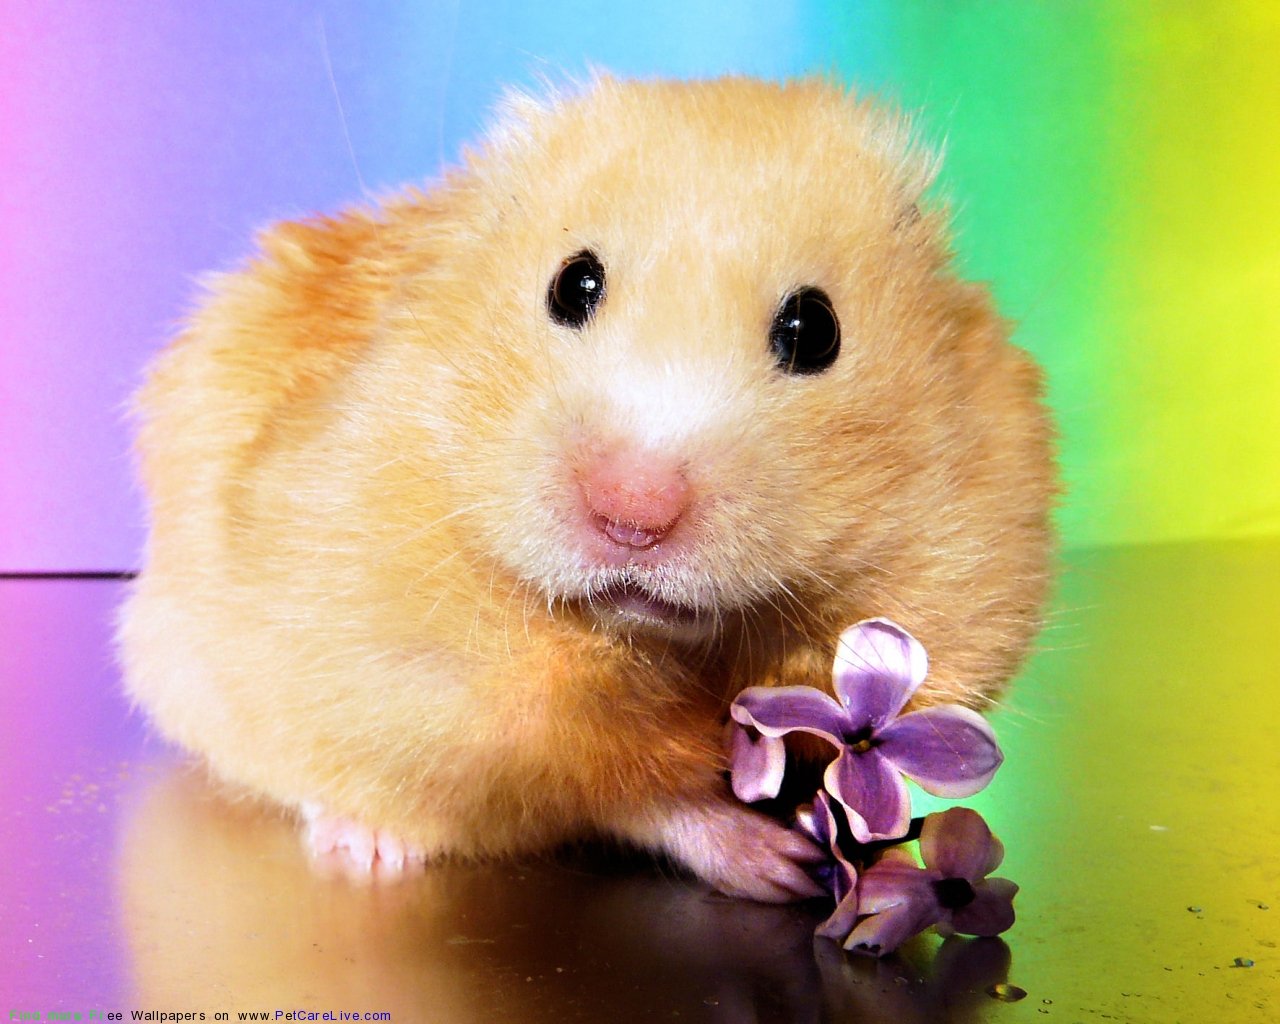 The Hamster computer wallpaper pictures for PC computer 14 1280x1024